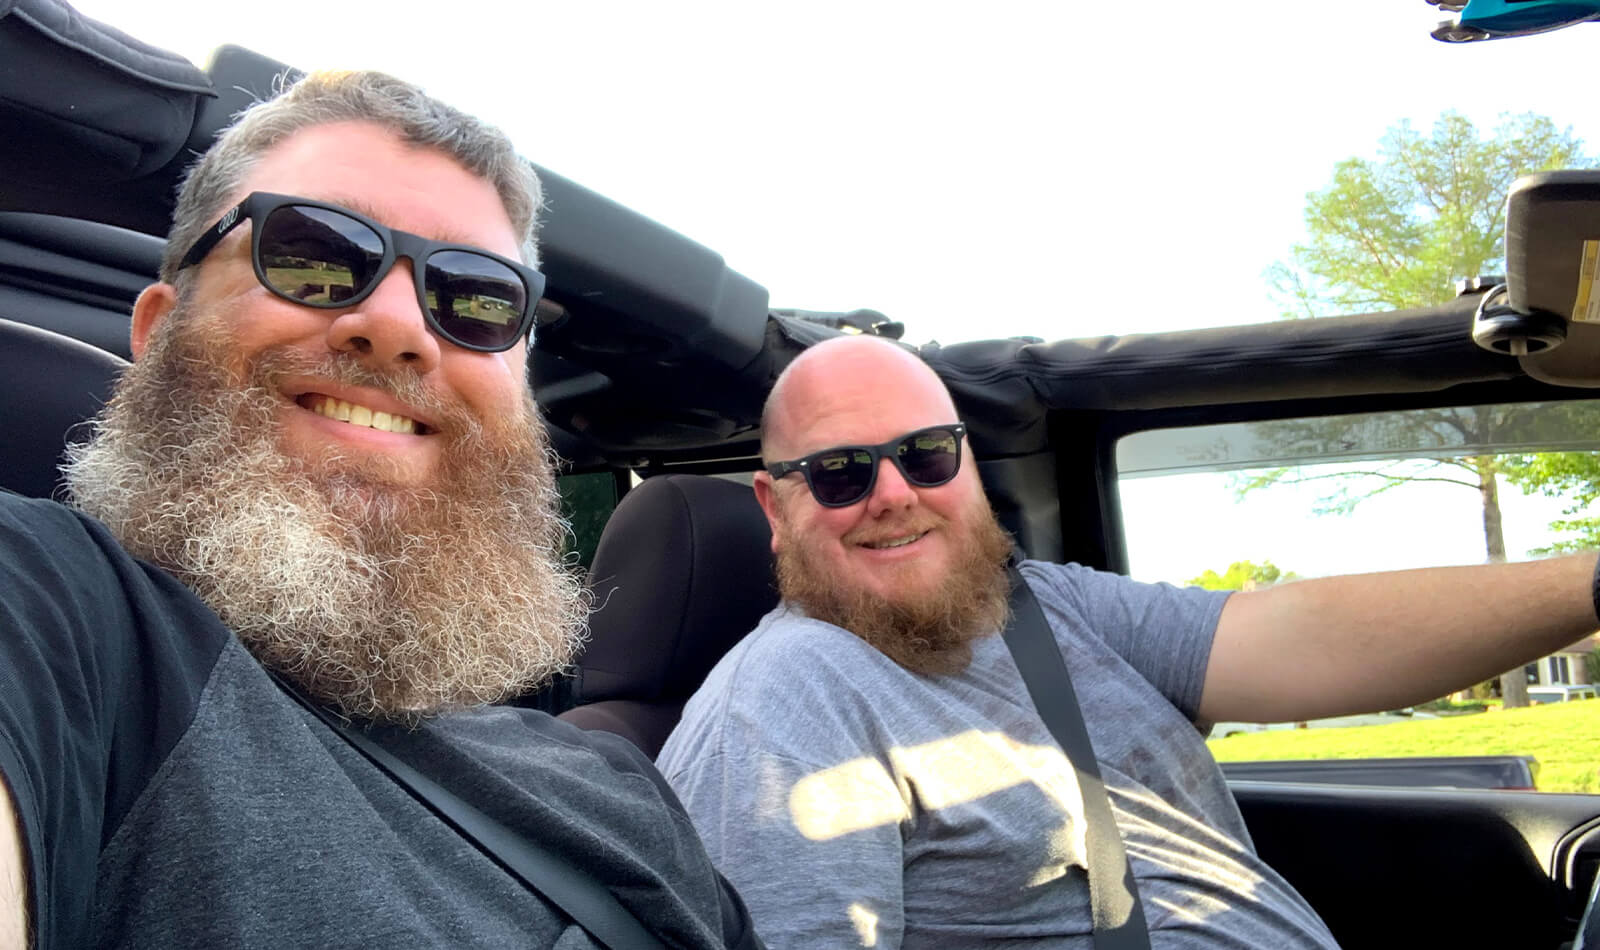 John enjoying the Texas weather with the jeep top down. 